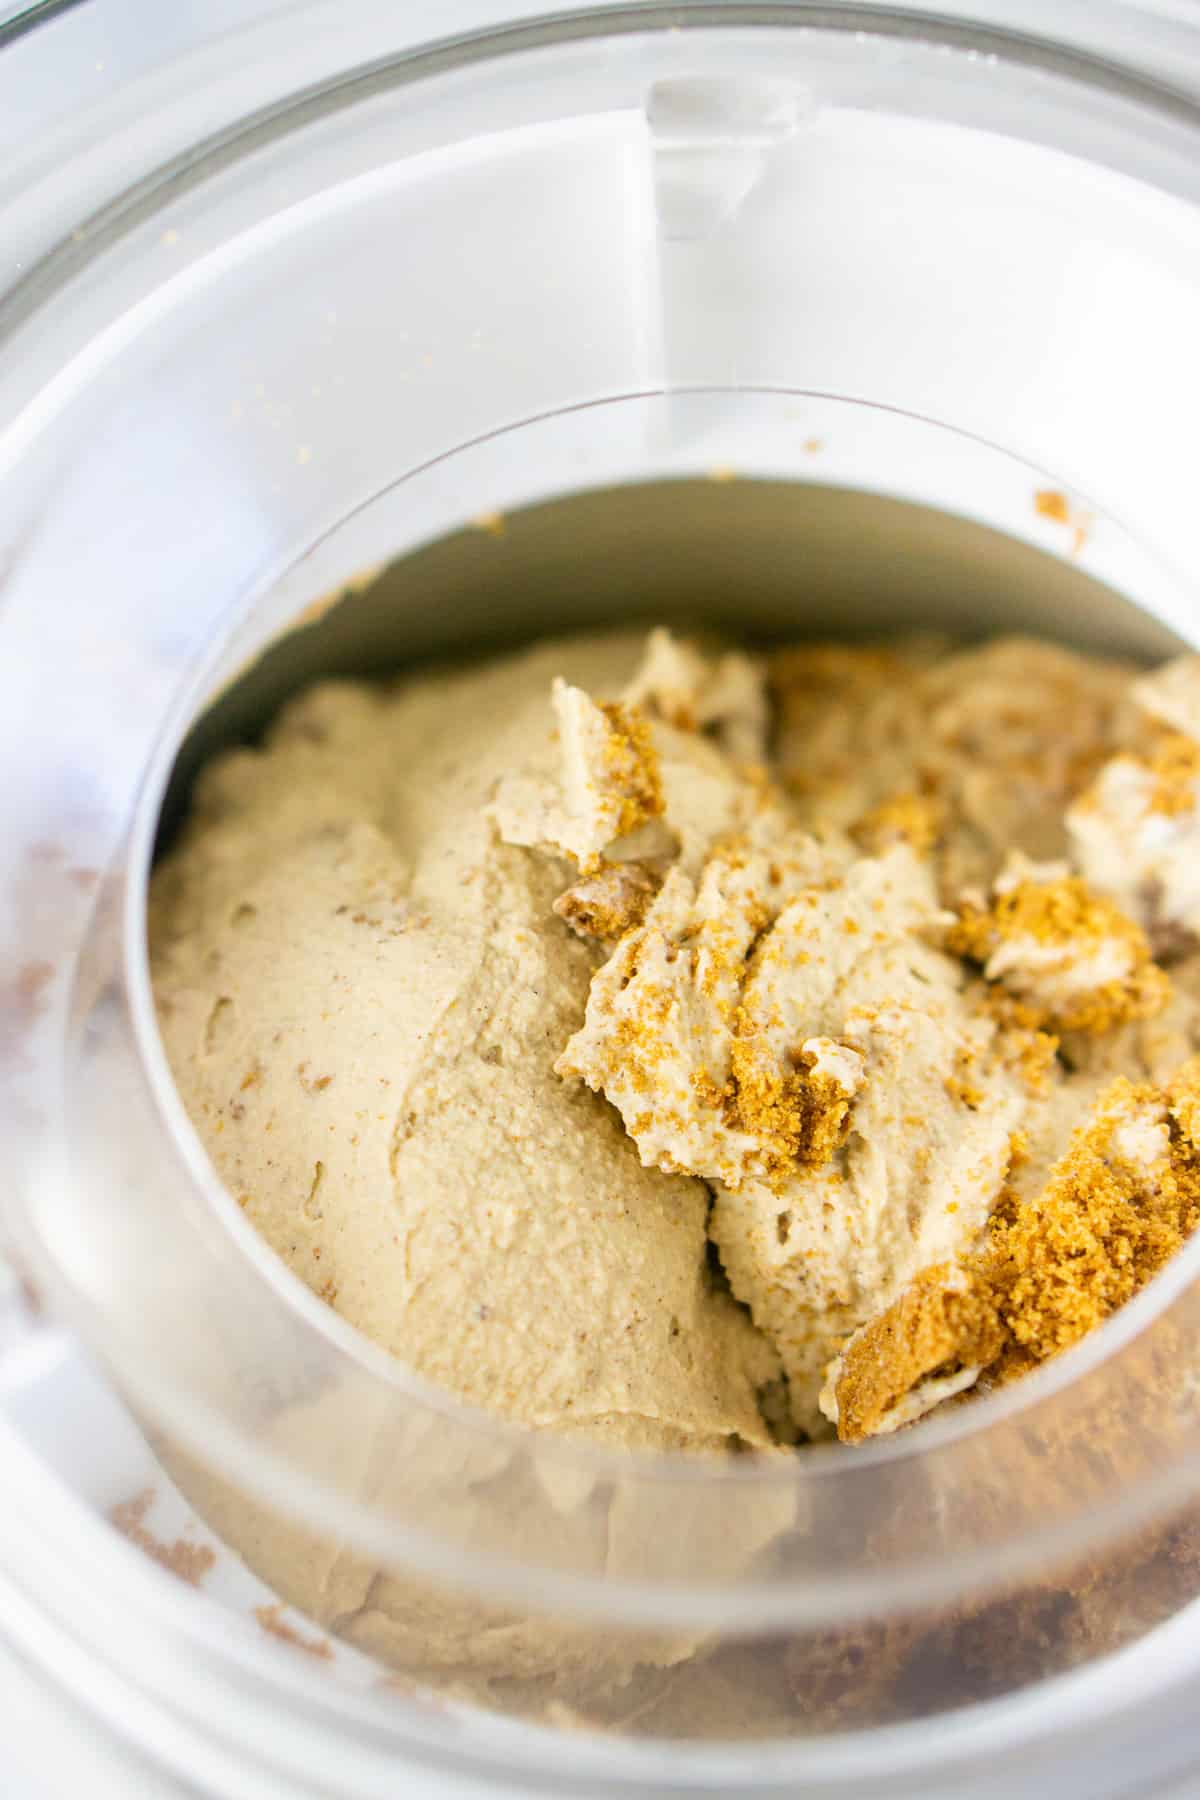 The ice cream in the ice cream maker with crushed ginger snaps being churned into the mixture.